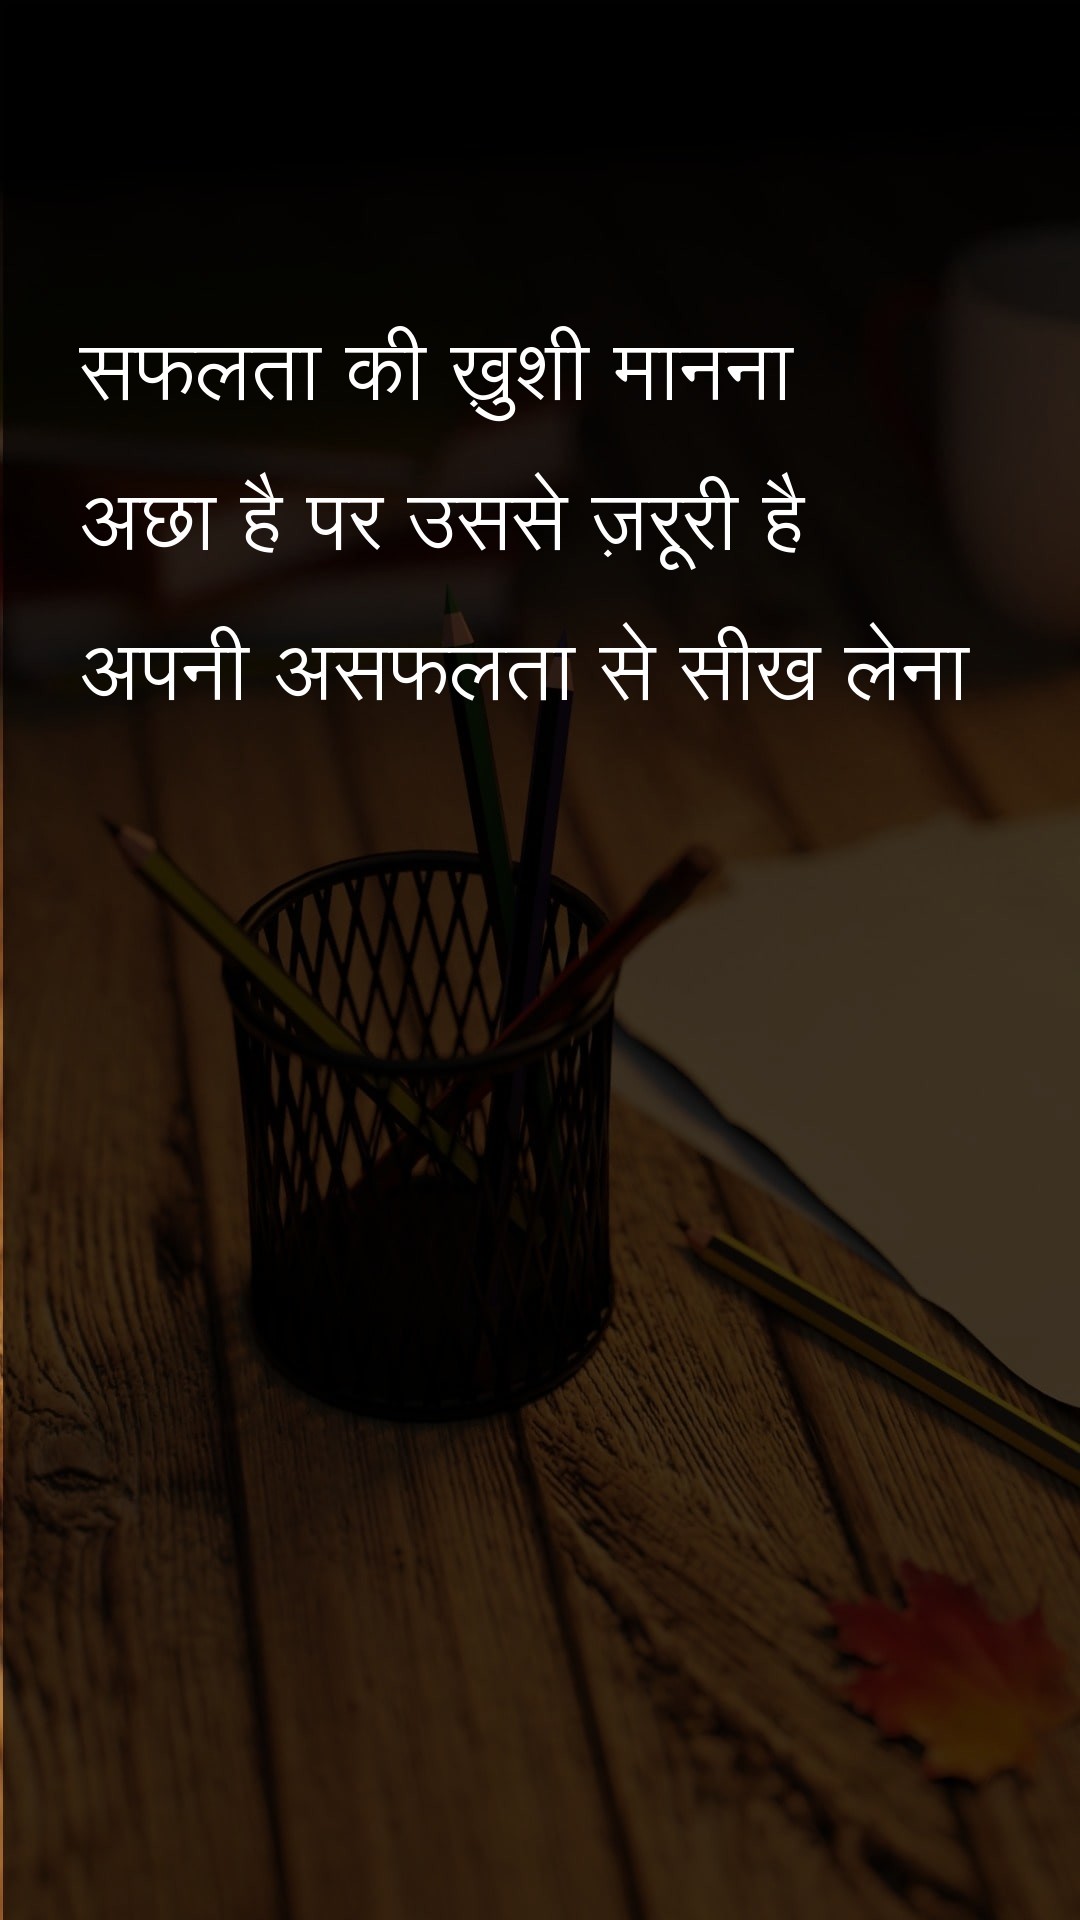 It is good to believe in success - Hindi Quotes at statush.com